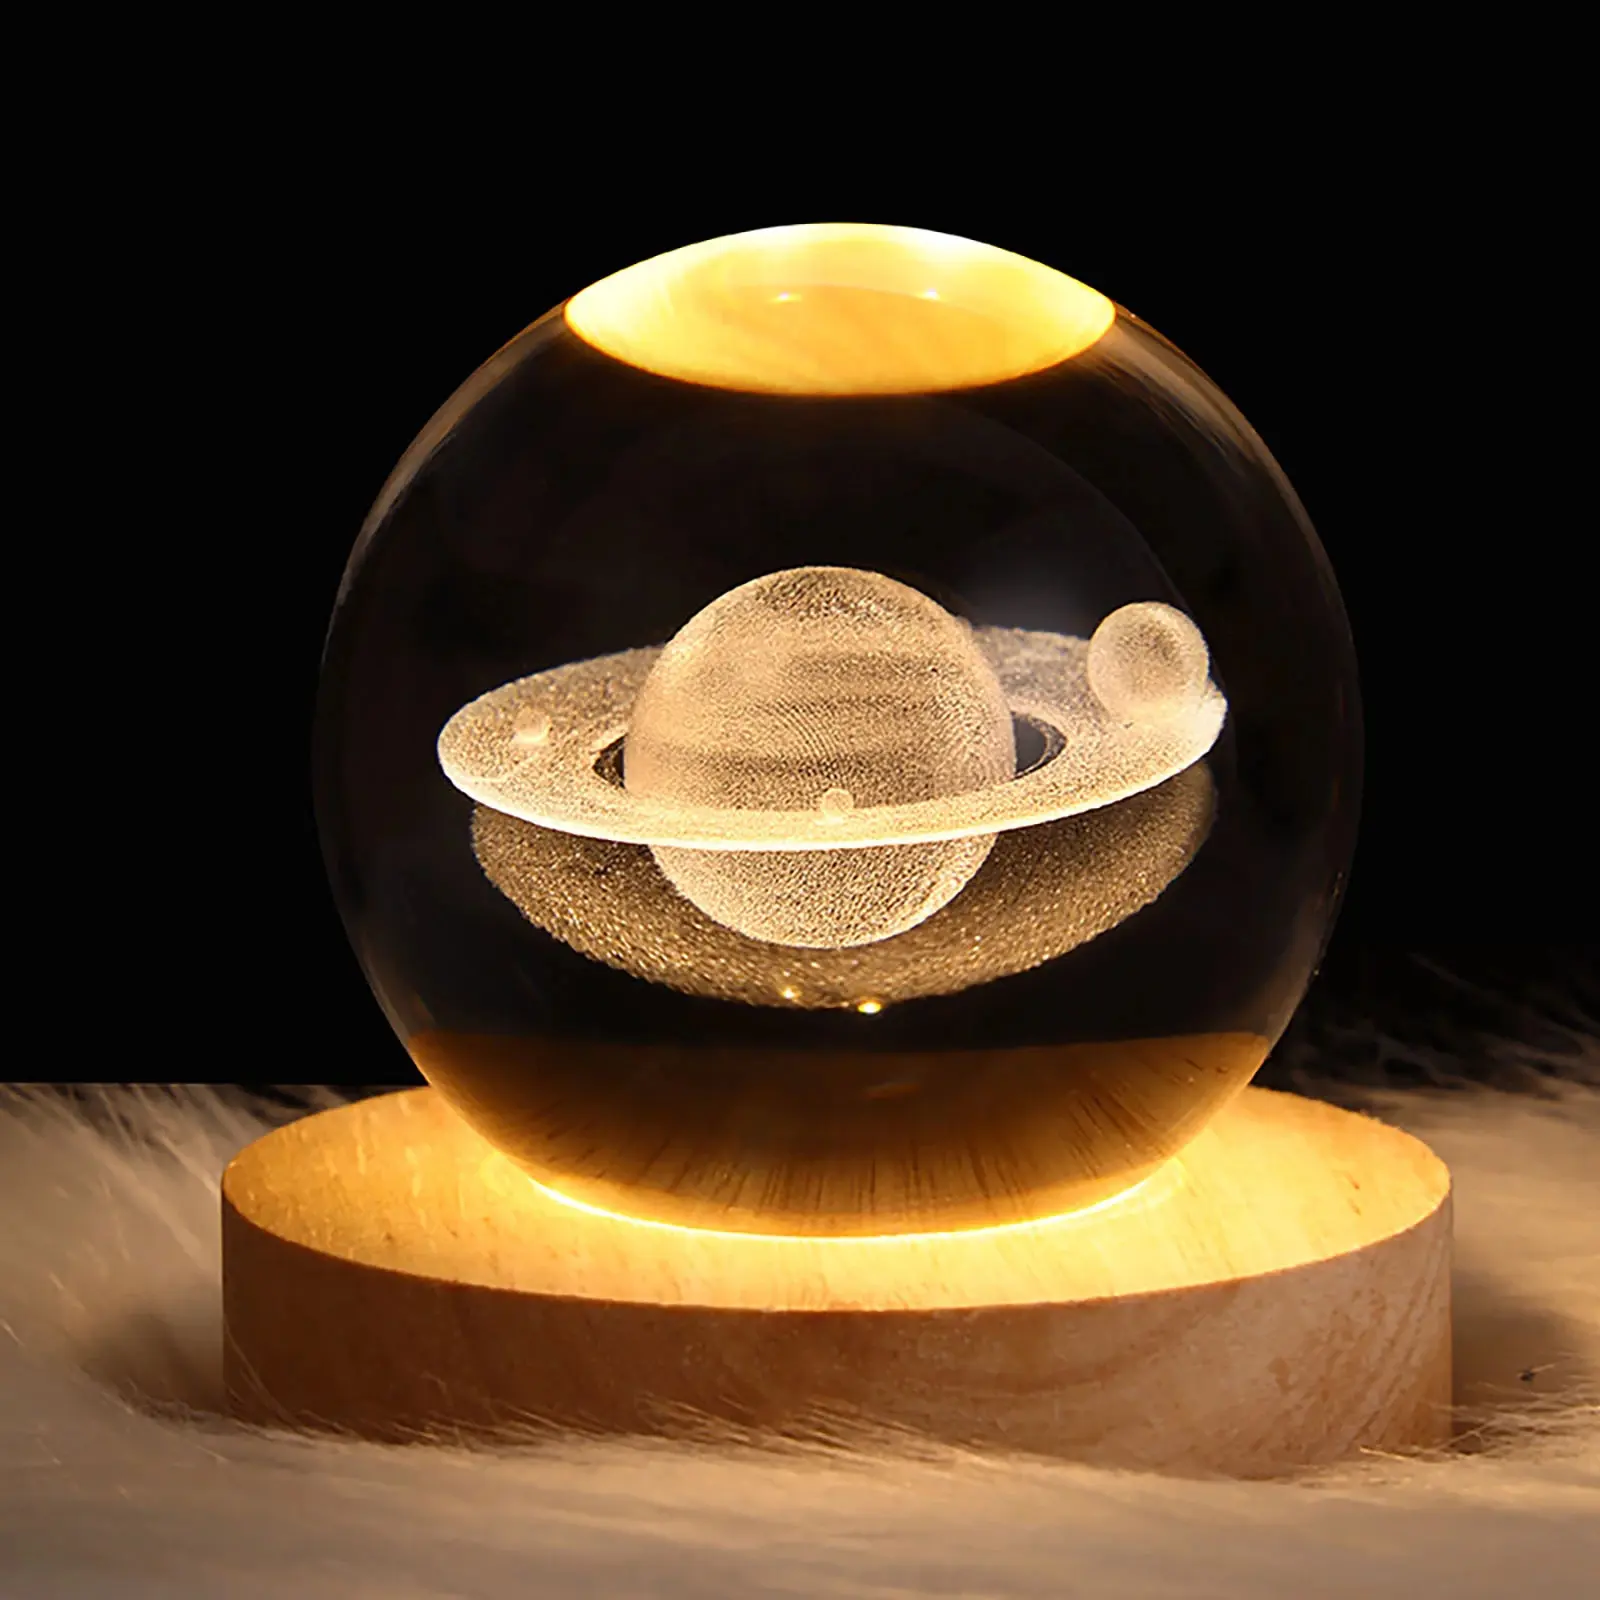 3D Crystal Ball Night Light Glowing Crystal Globe With Wood Stand Creative Decorative Ball Lamp For House Patio Hotel Birthday